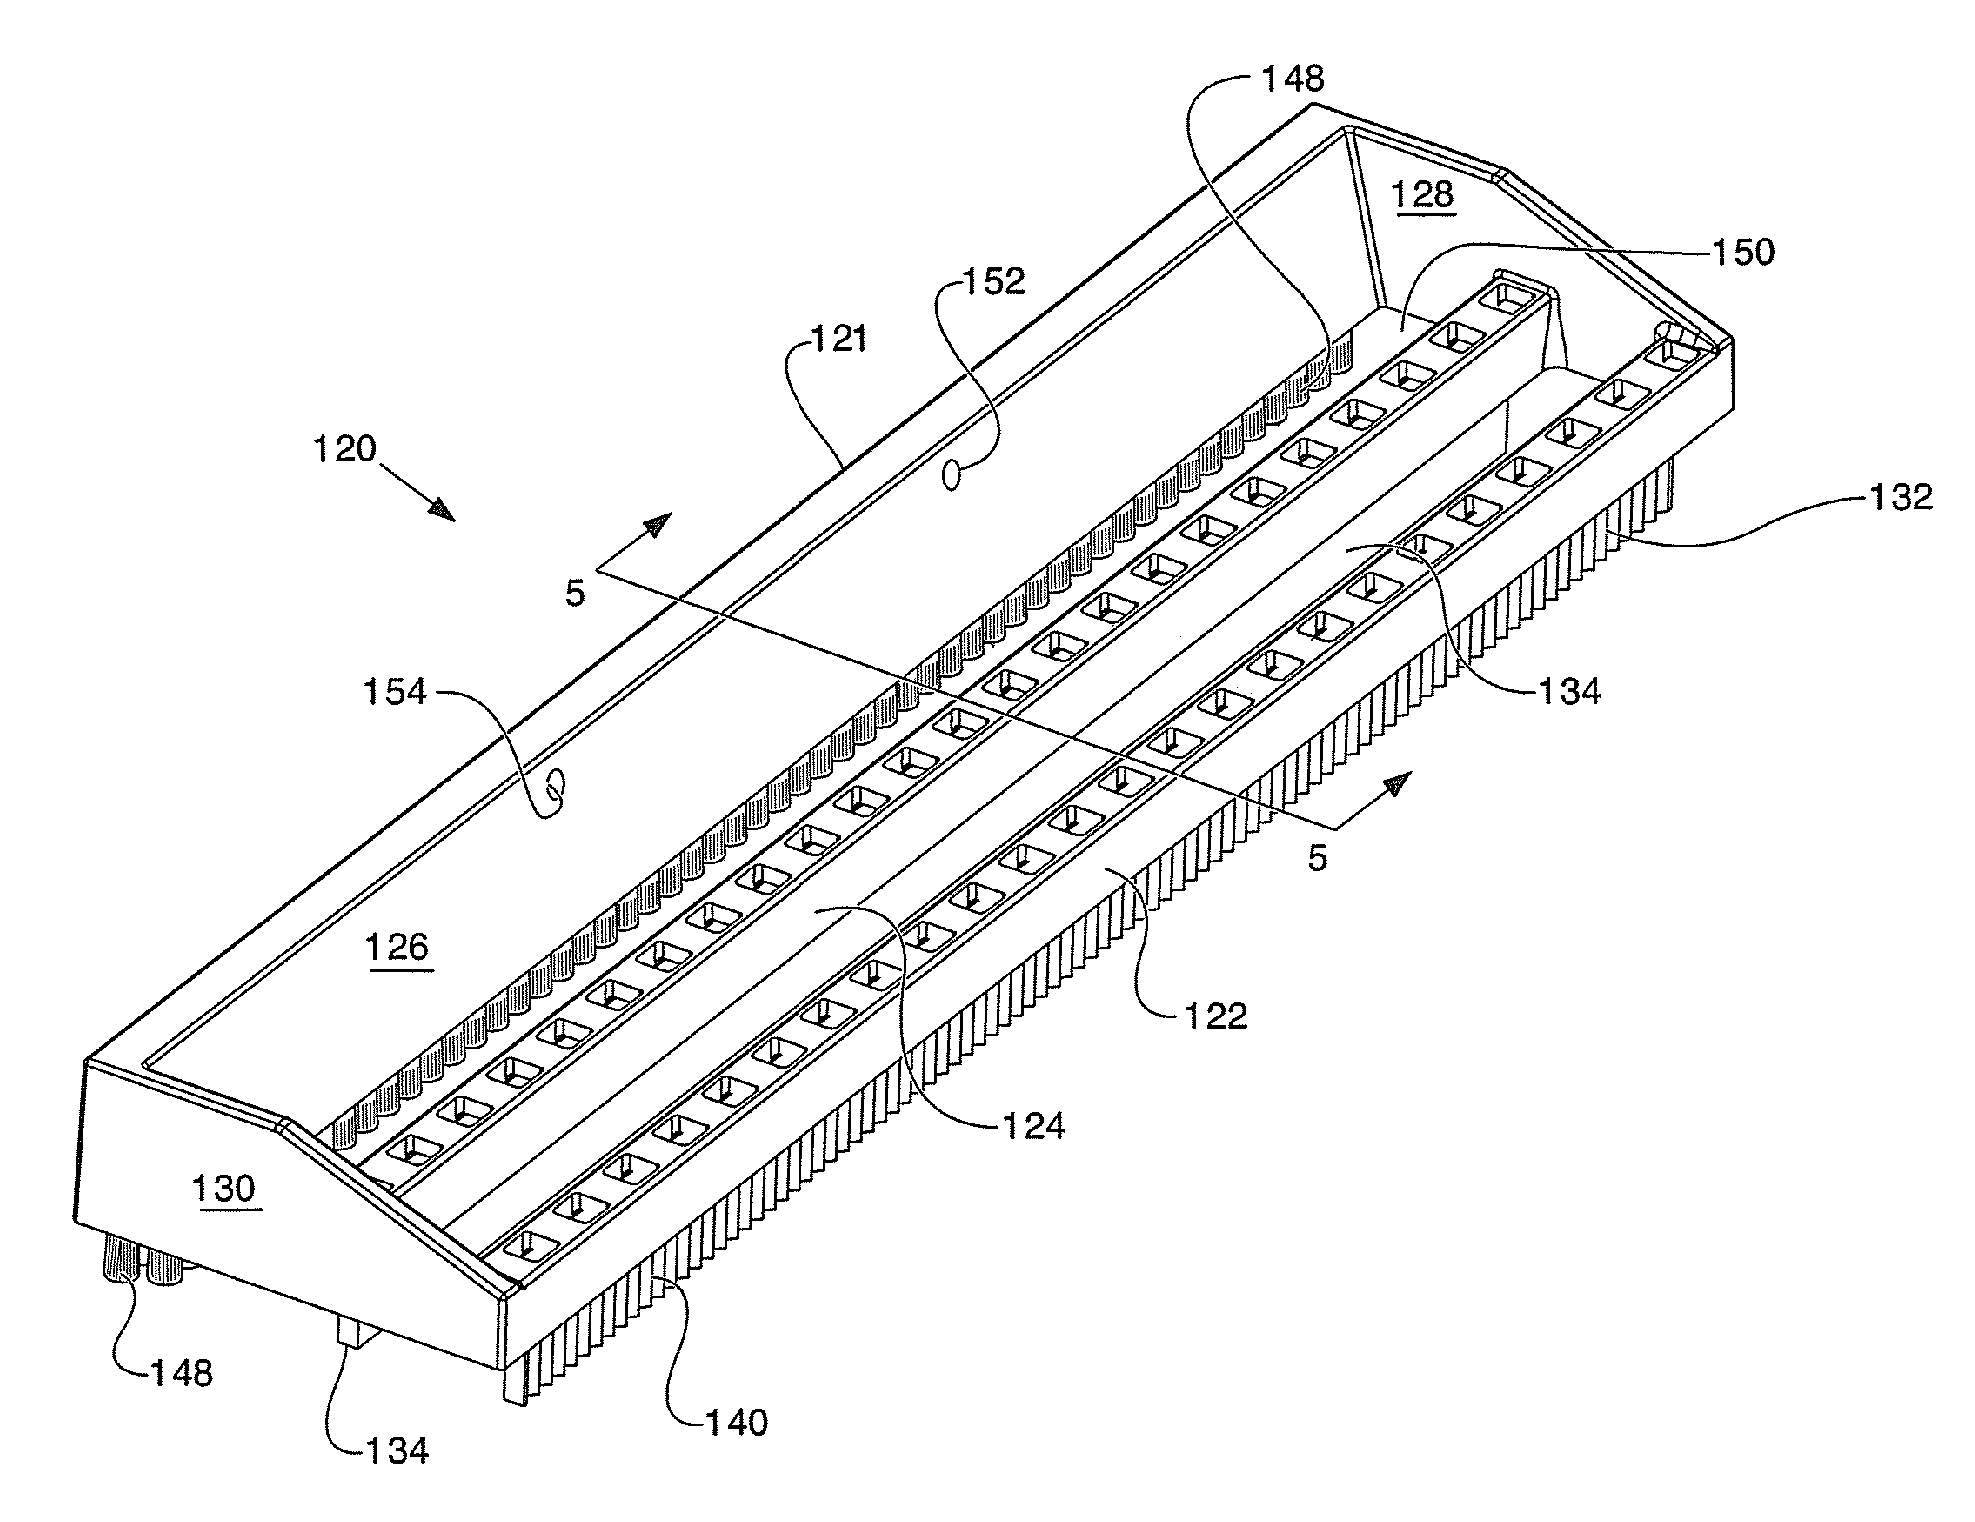 Dual purpose floor cleaning apparatus and method of use